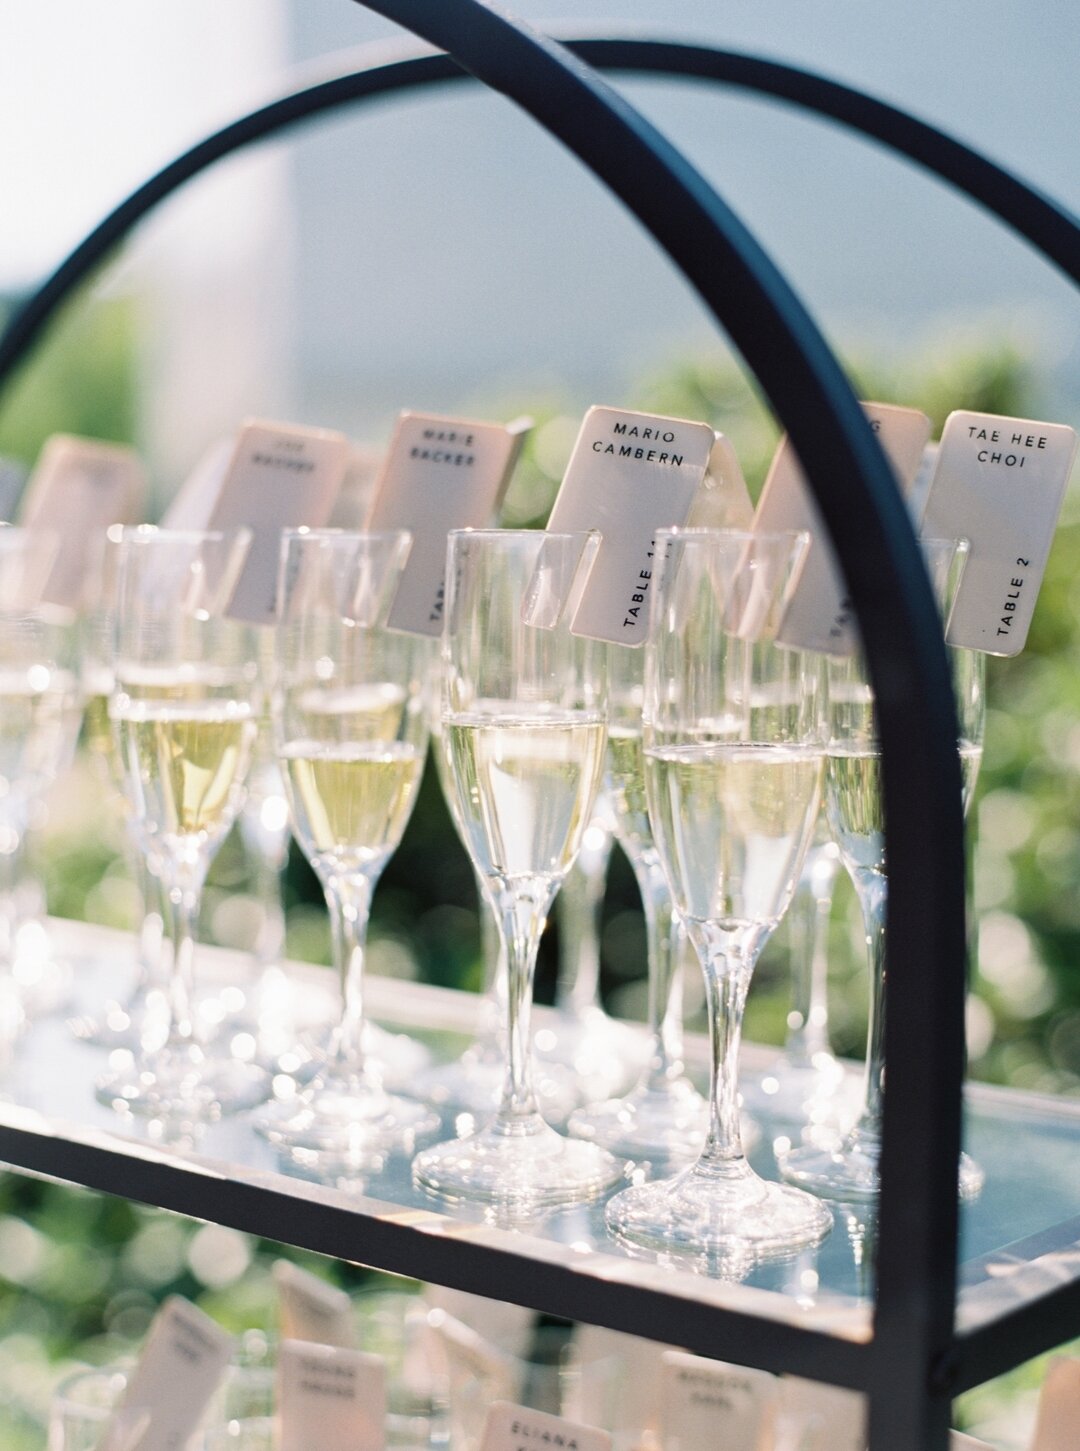 GUEST EXPERIENCE // We believe that a distinctive seating arrangement can add a touch of charm and class to your special day. But why stop there? Why not treat your guests to a glass of bubbly as well? Our clients prioritize guest experience to ensur